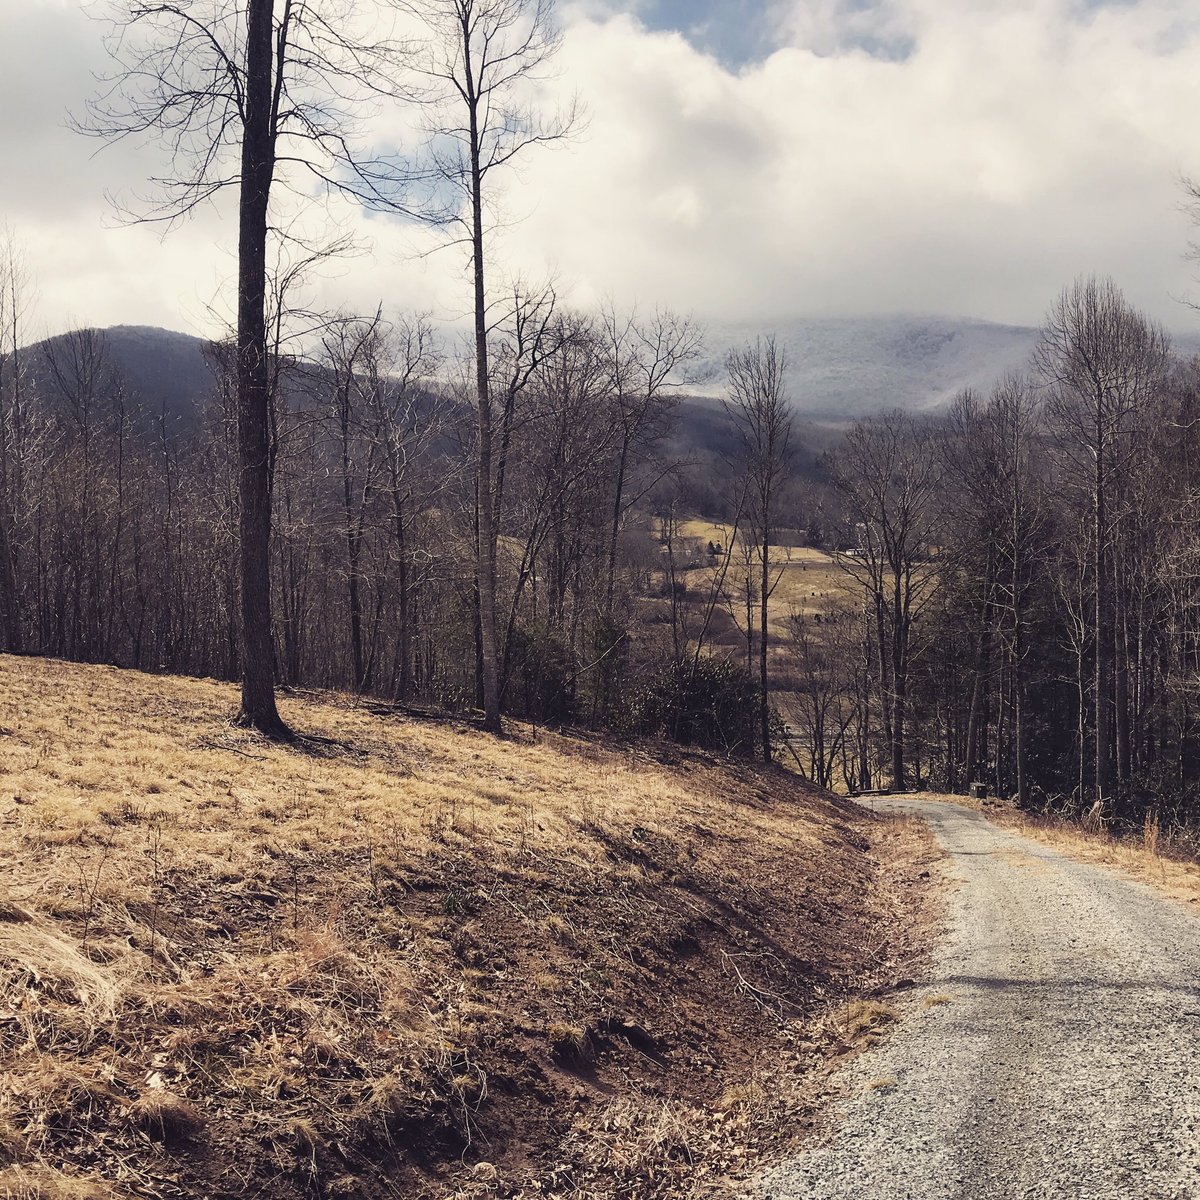 Springtime view from Dongola Cabin of Whitetop Mountain. #dongolacabin #uponthelaurel #airbnb #appalachia #usinterior #appalachiantrail #whitetopmountain #spring #springtime #driveway #clouds #sky #konnarock #jeffersonnationalforest